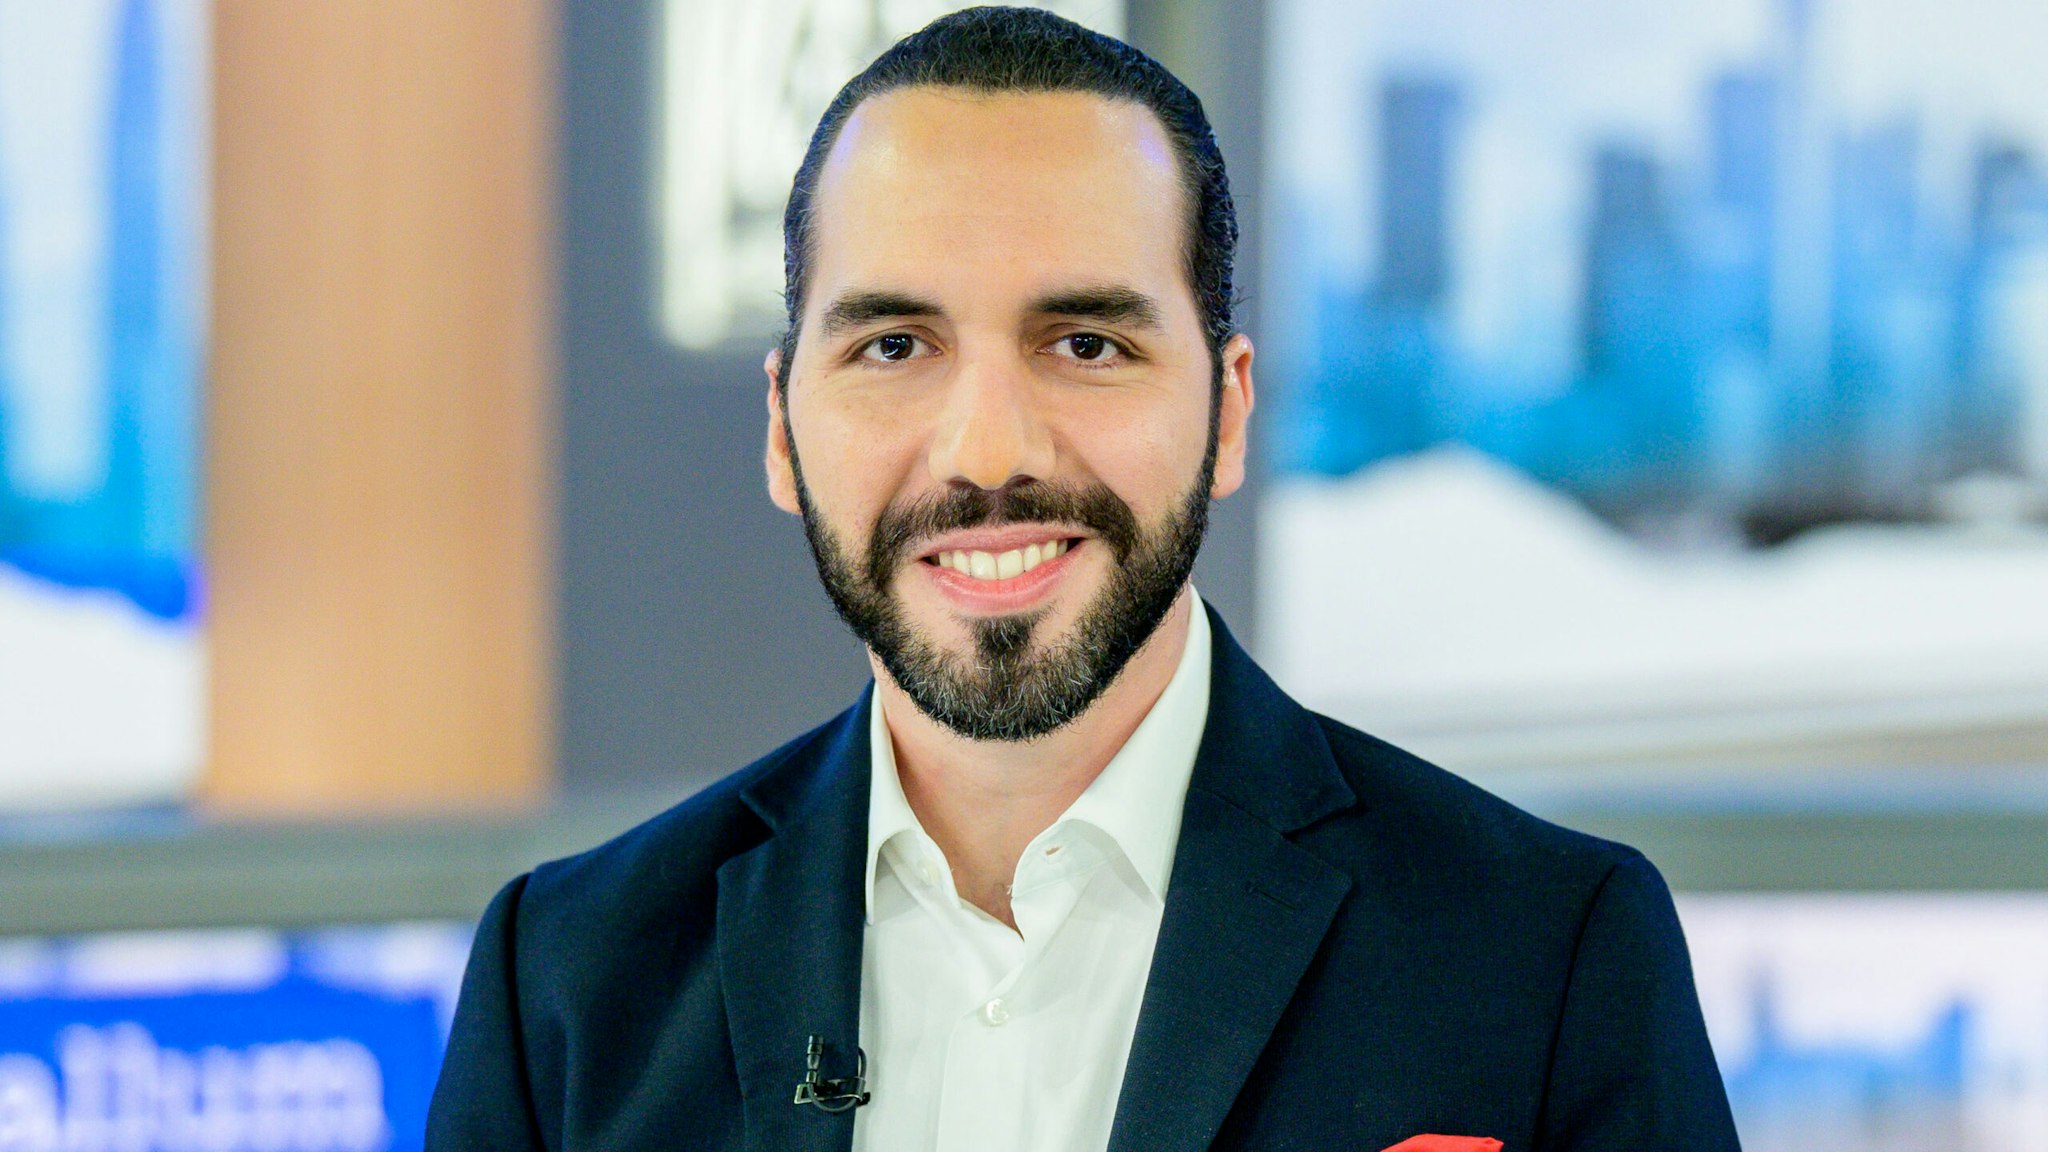 NEW YORK, NEW YORK - SEPTEMBER 26: President of El Salvador Nayib Bukele visits "The Story With Martha MacCallum" at Fox News Channel Studios on September 26, 2019 in New York City.